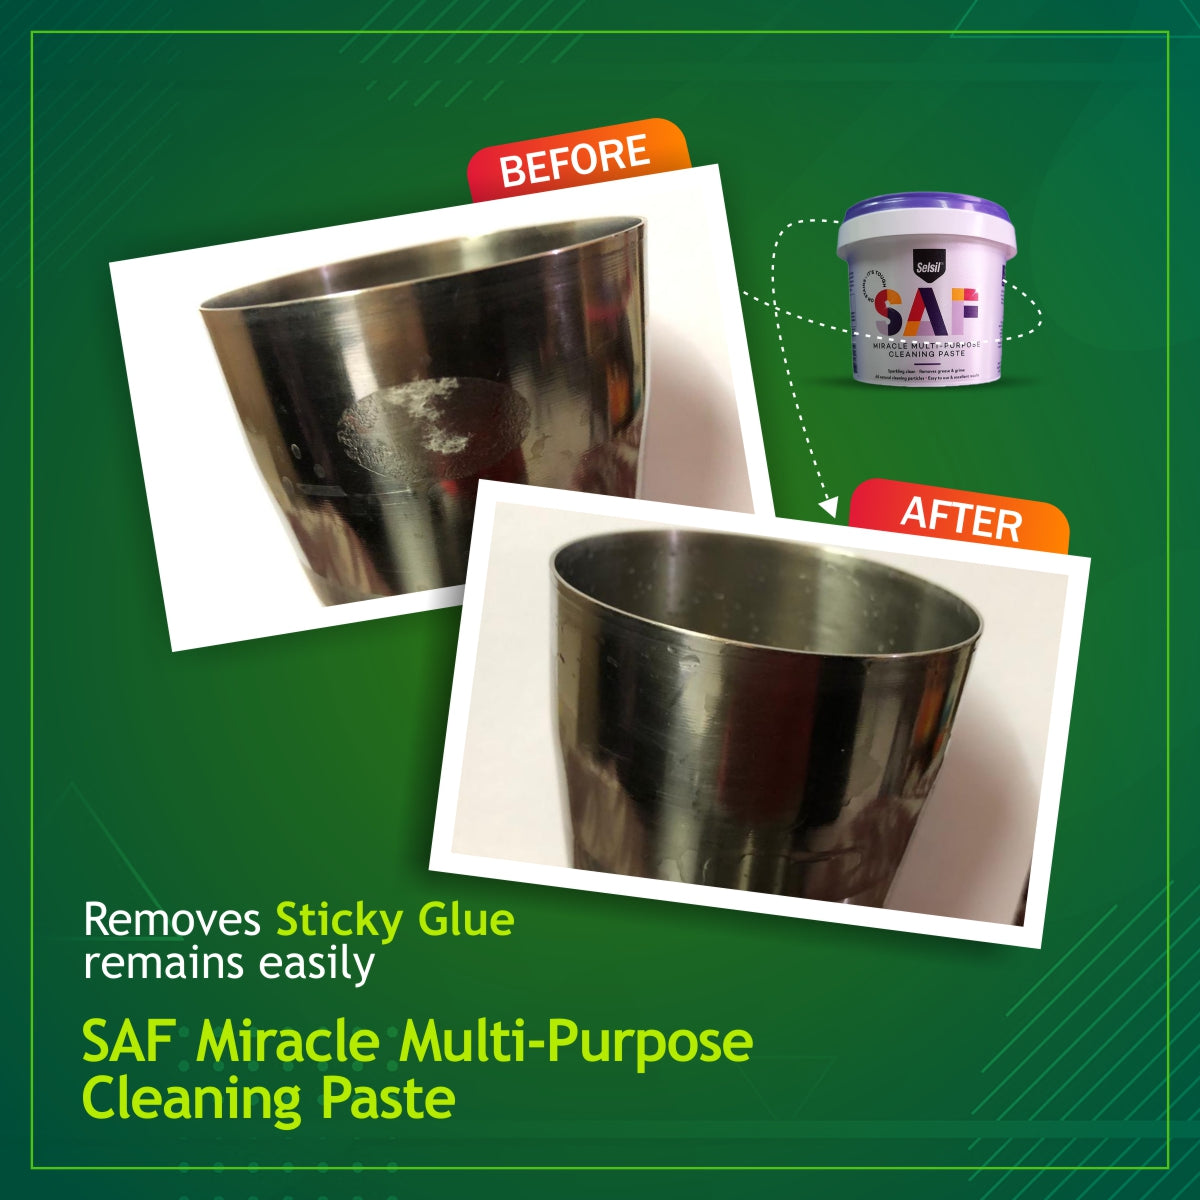 SAF Miracle Multi-Purpose Grease Cleaner